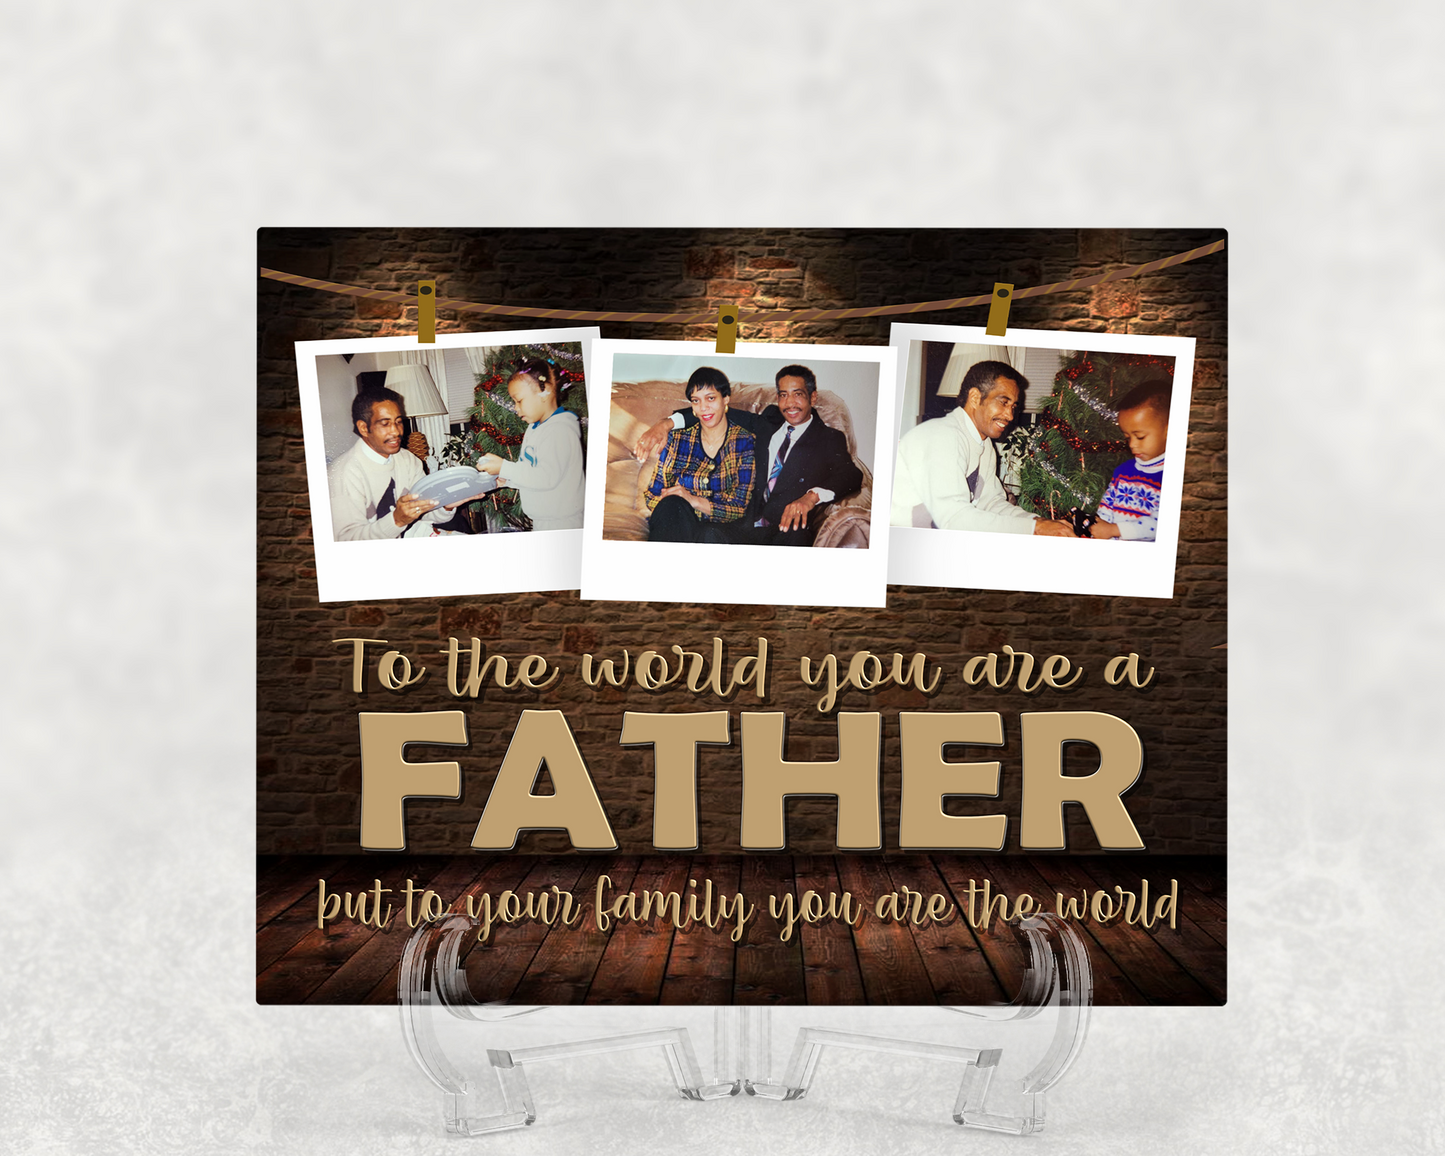 To the world you are a father - PNG - 2 DESIGNS